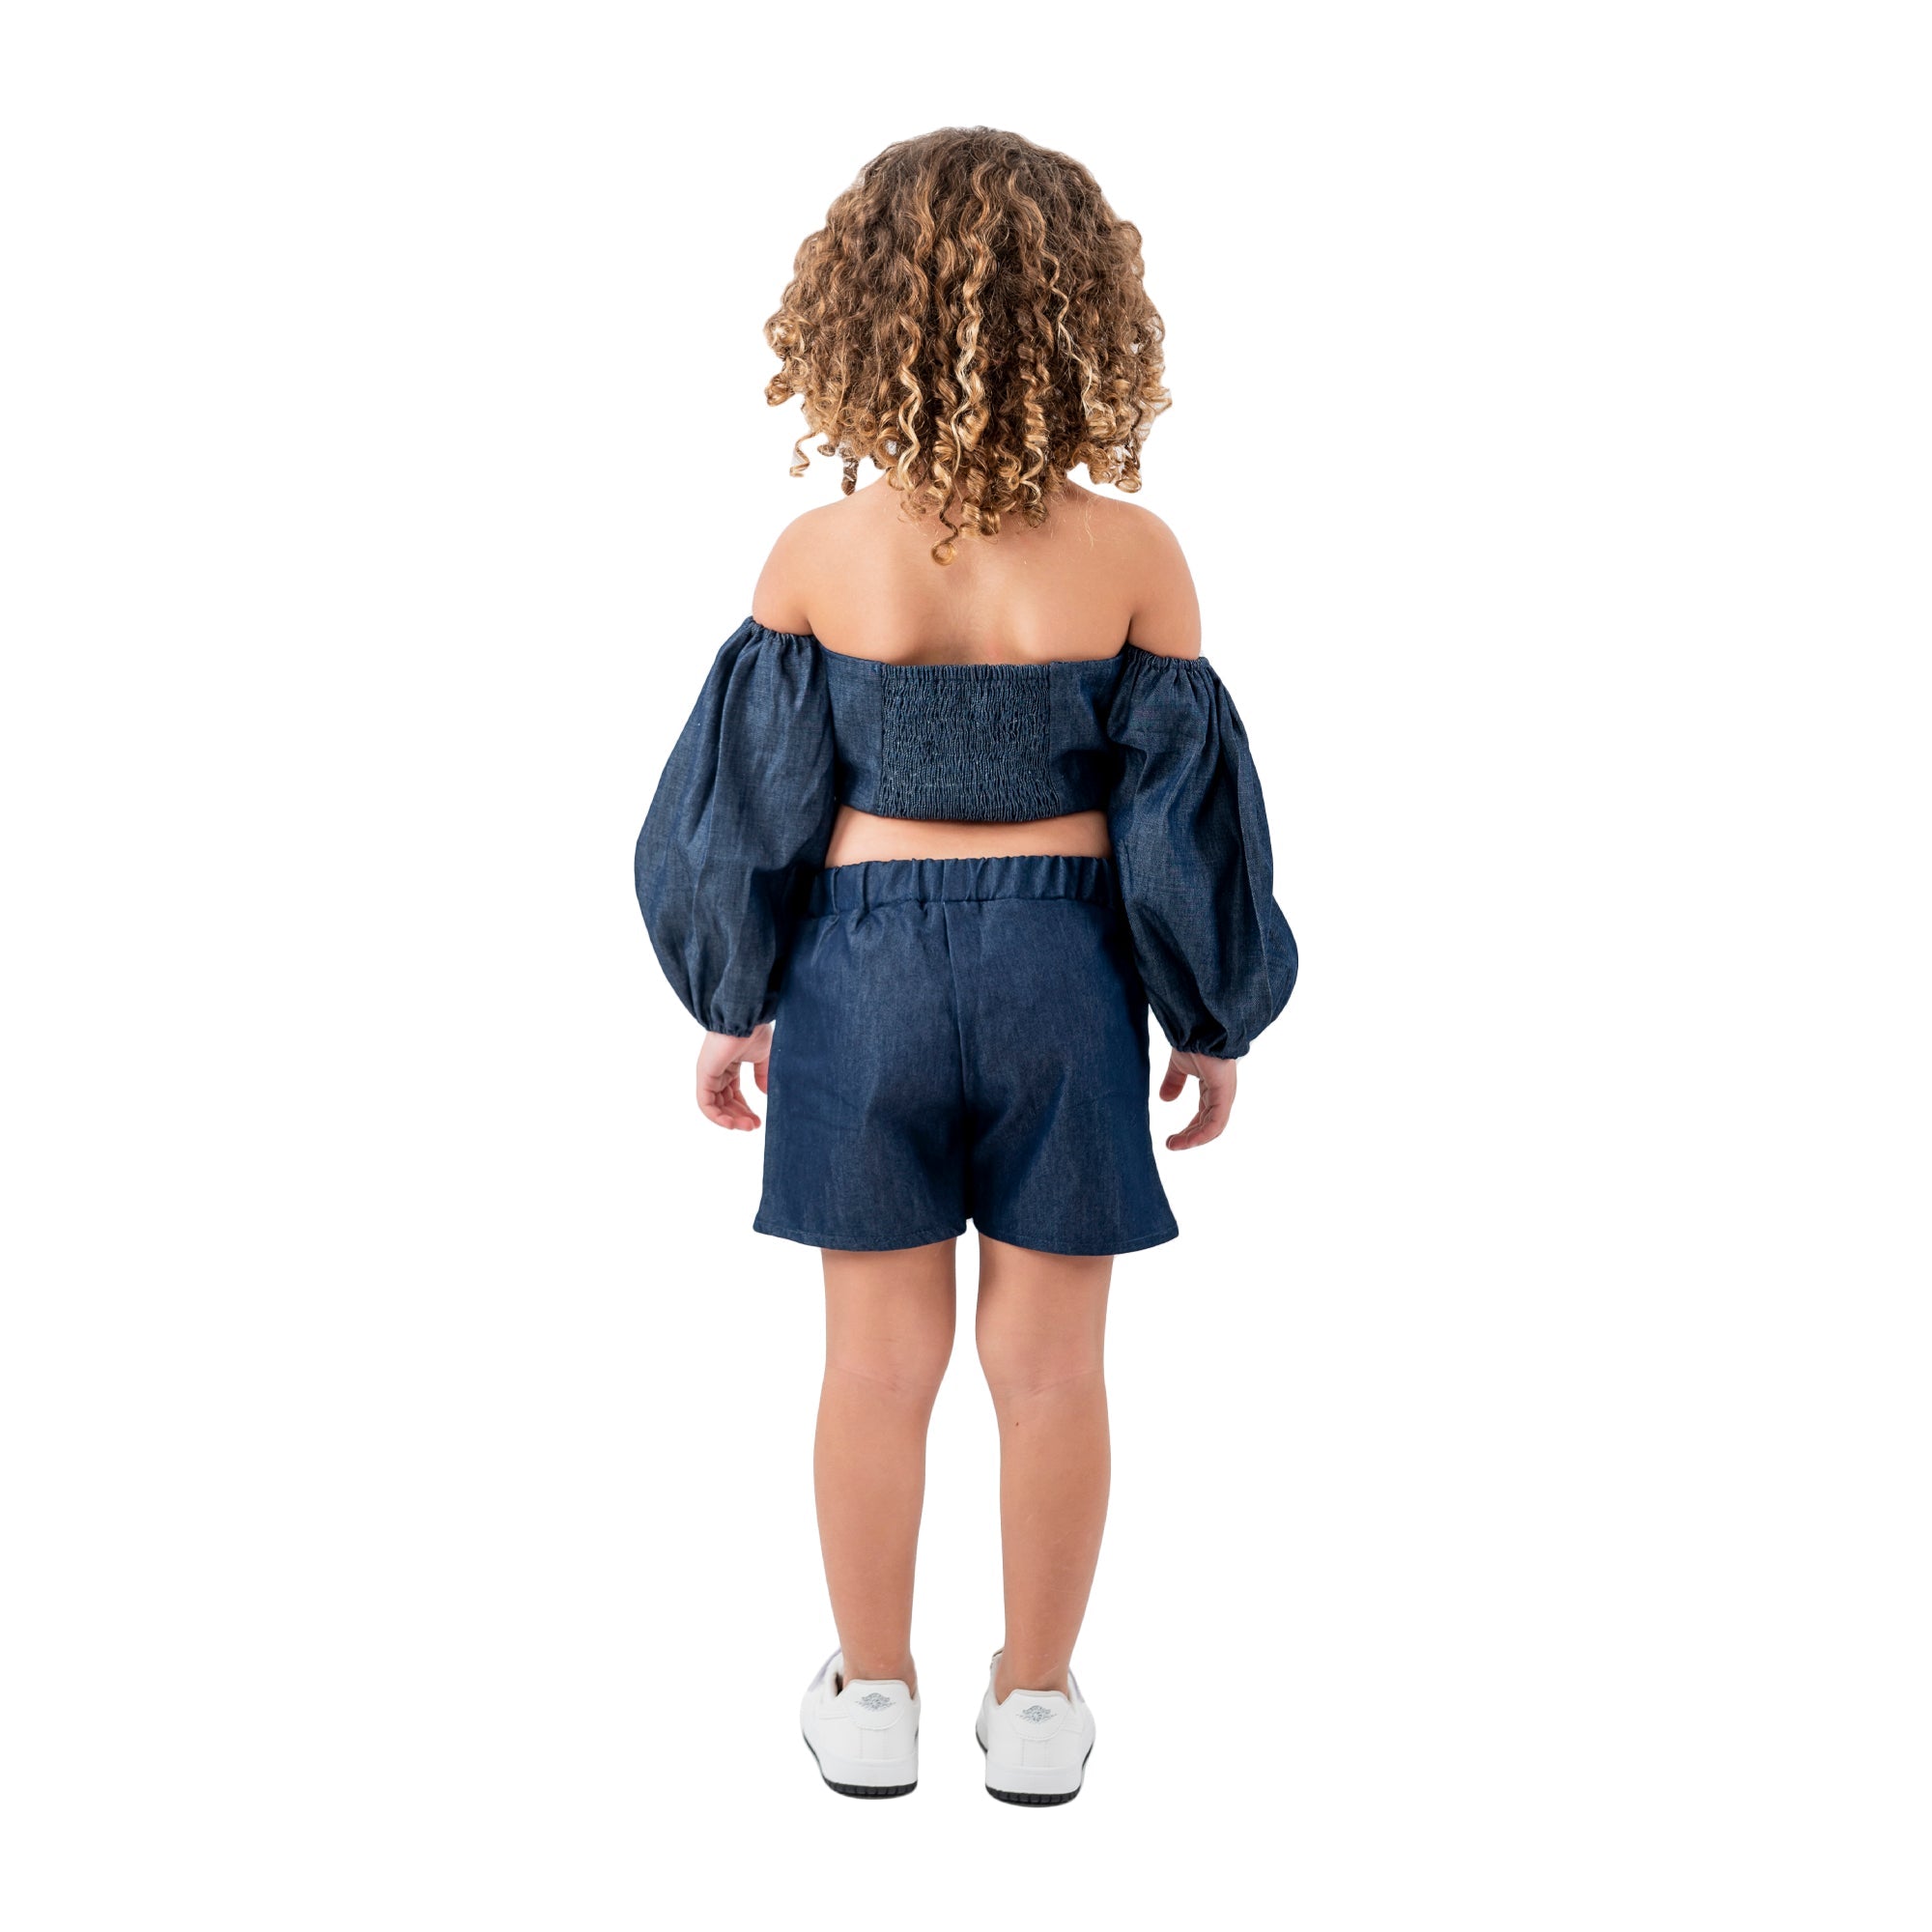 Venti Lace Frill Trim Bardot With Short For Girls 404739 Dark Jeans, Target Gender: Girls, Color Family: Multicolor, Material: Mixed Materials, Target Age: 12 - 18 Months, 2 image